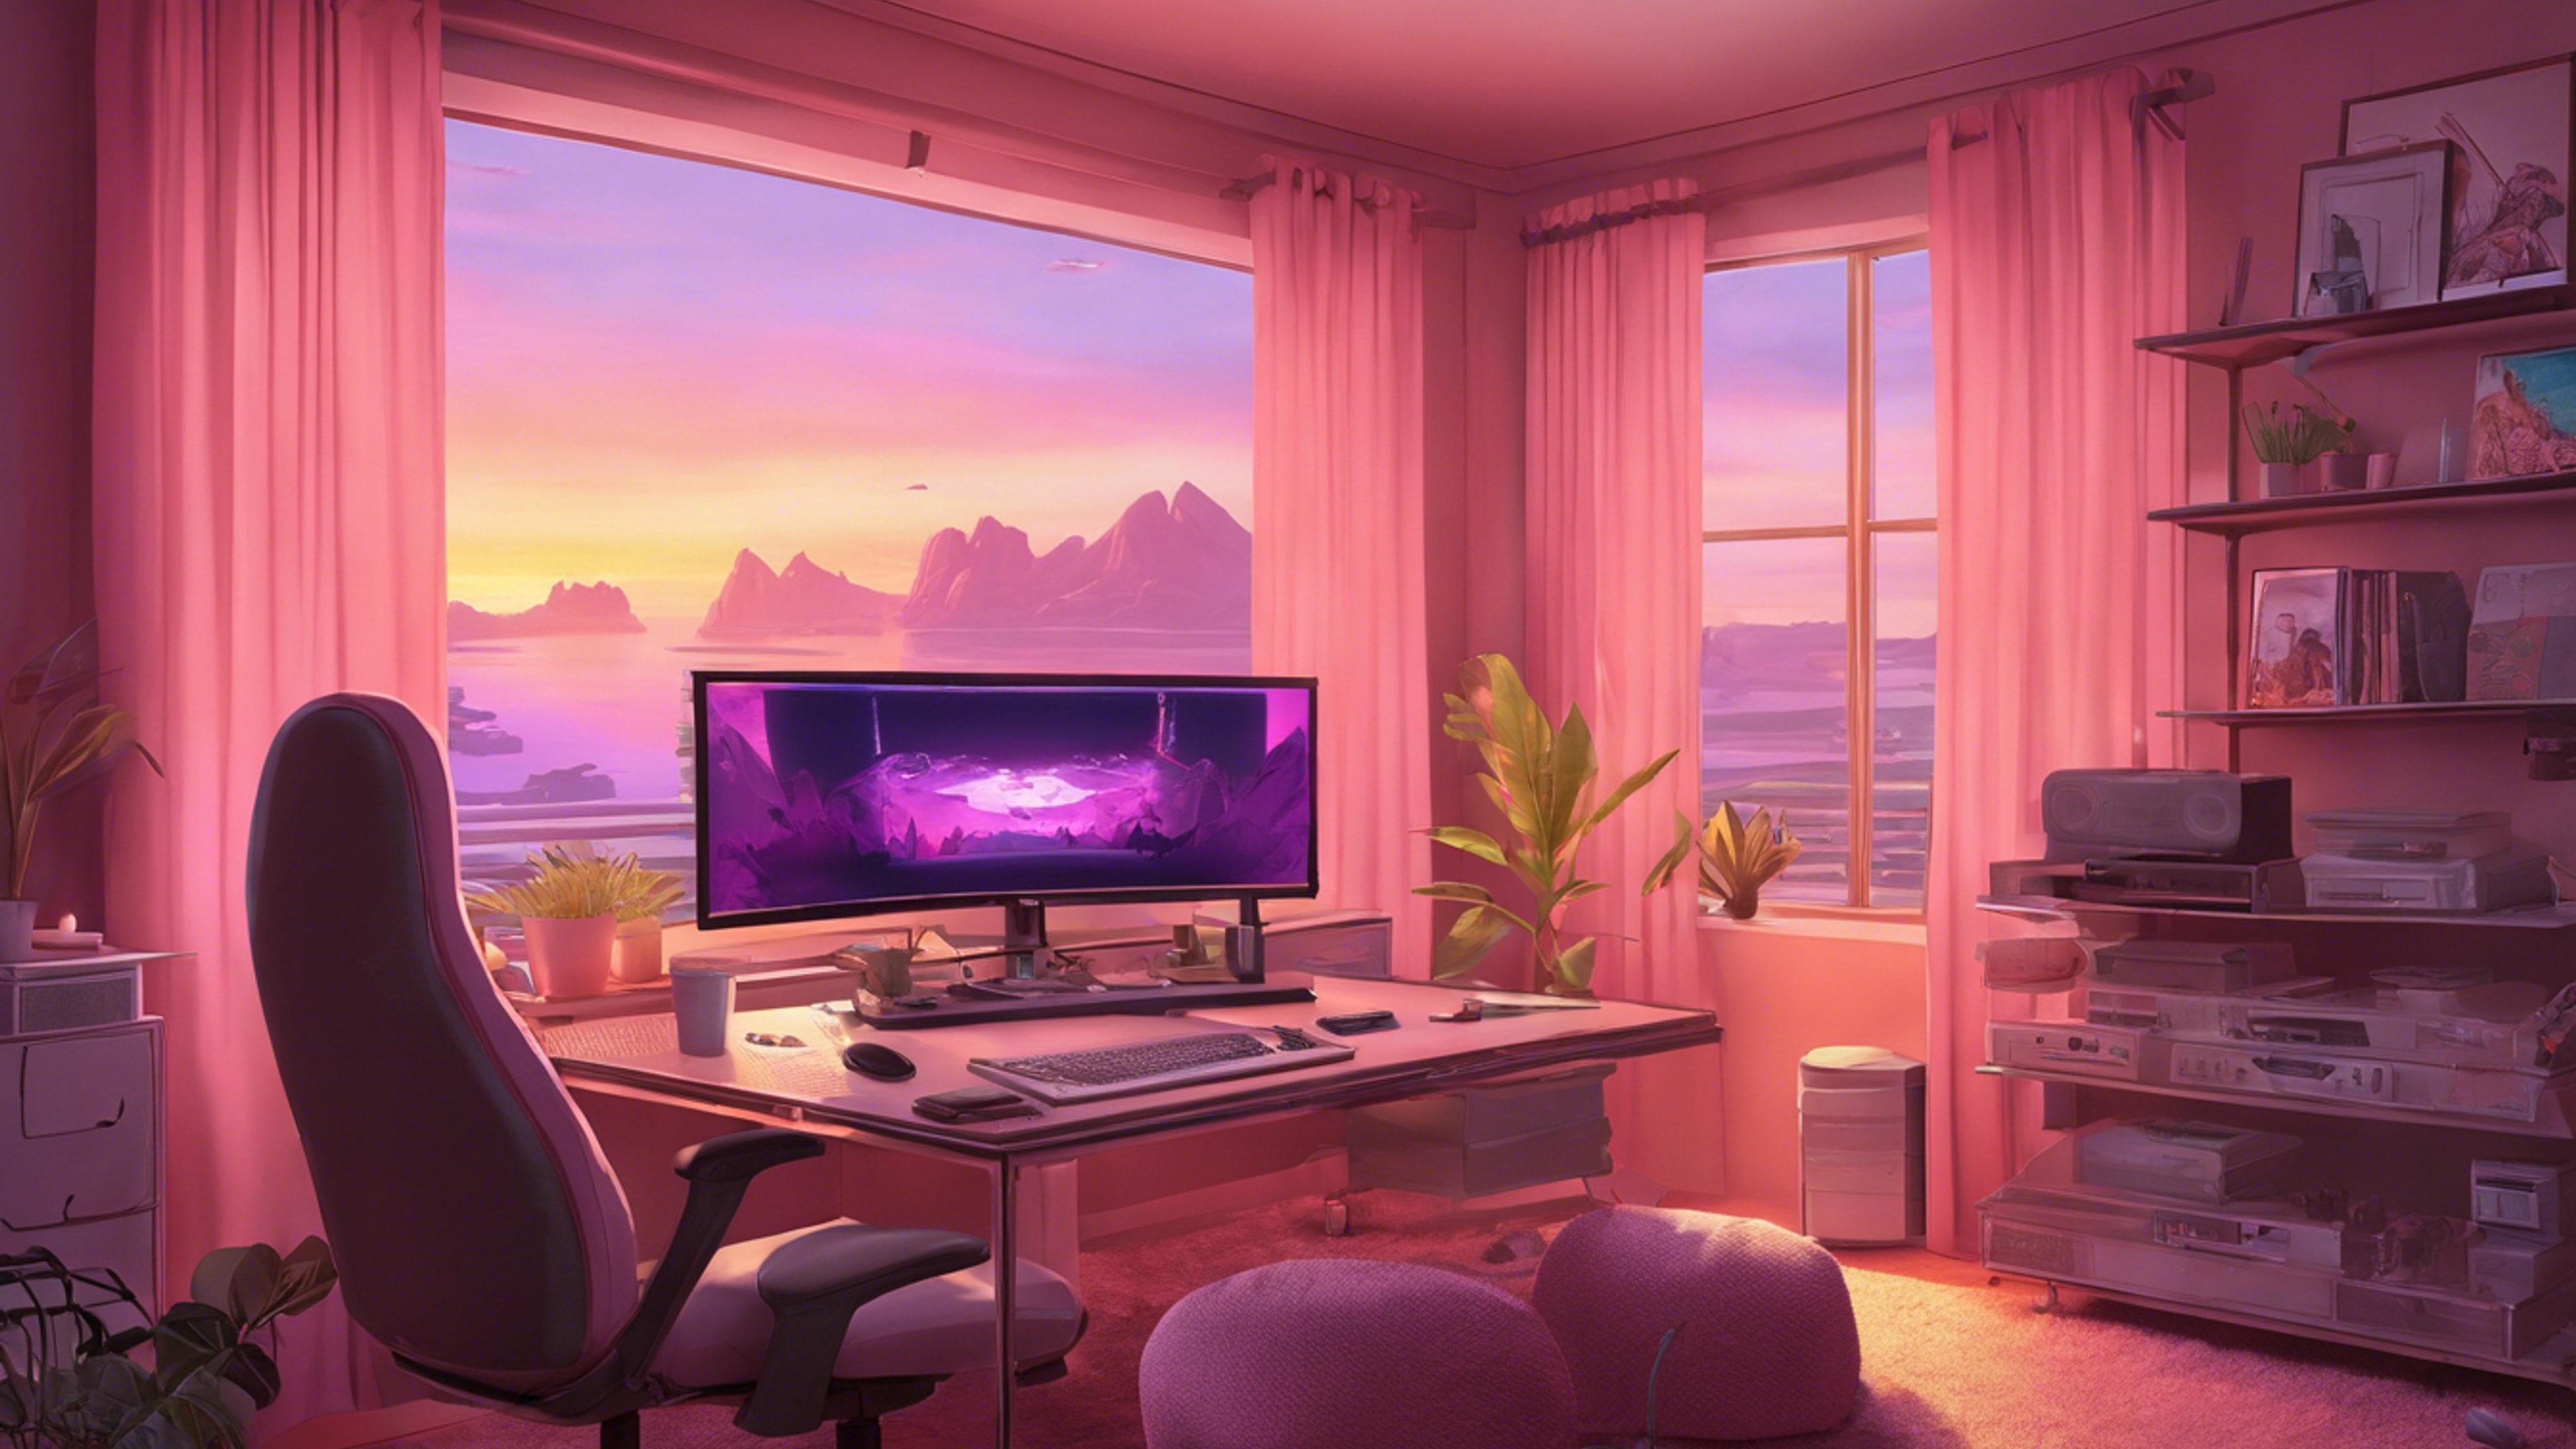 A beautiful shot of a gaming room at dusk with pastel pink curtains slightly drawn, allowing soft sunset hues to blend with the gaming setup's ambient light. Дэлгэцийн зураг[98f2c4ff56214265aa5c]